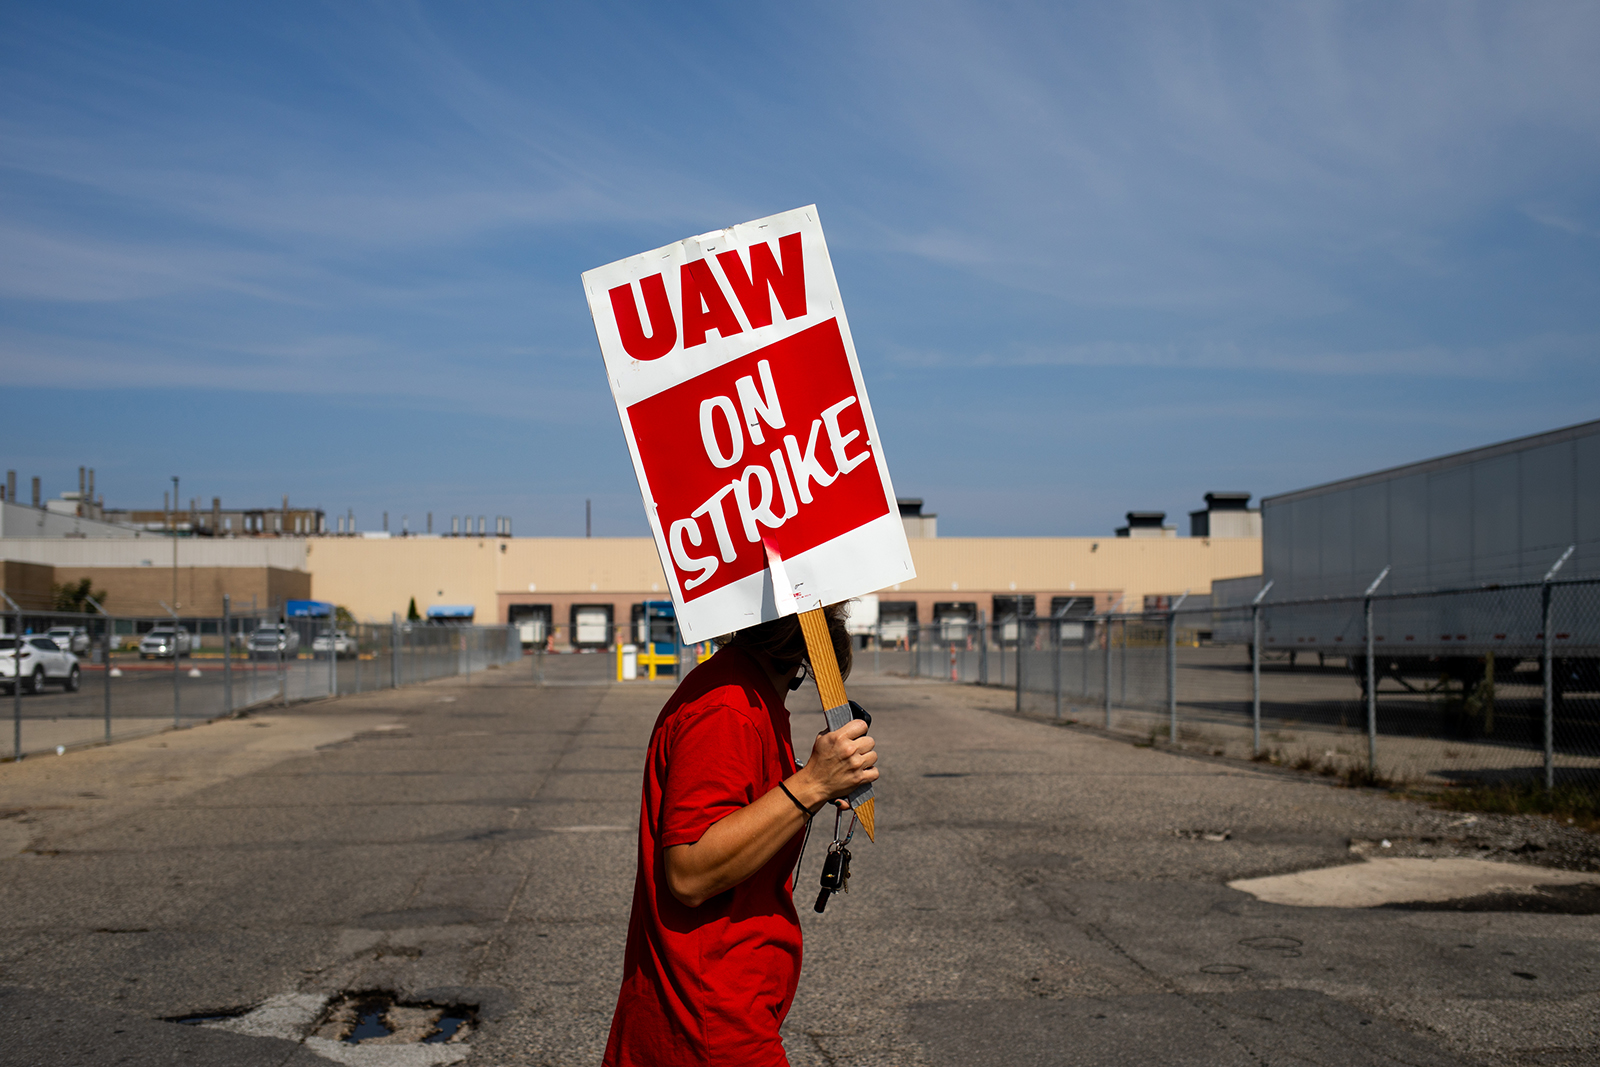 A "UAW On Strike" sign held on a picket line outside the main entrance at the General Motors Co. Ypsilanti Processing Center in Ypsilanti, Michigan, today.